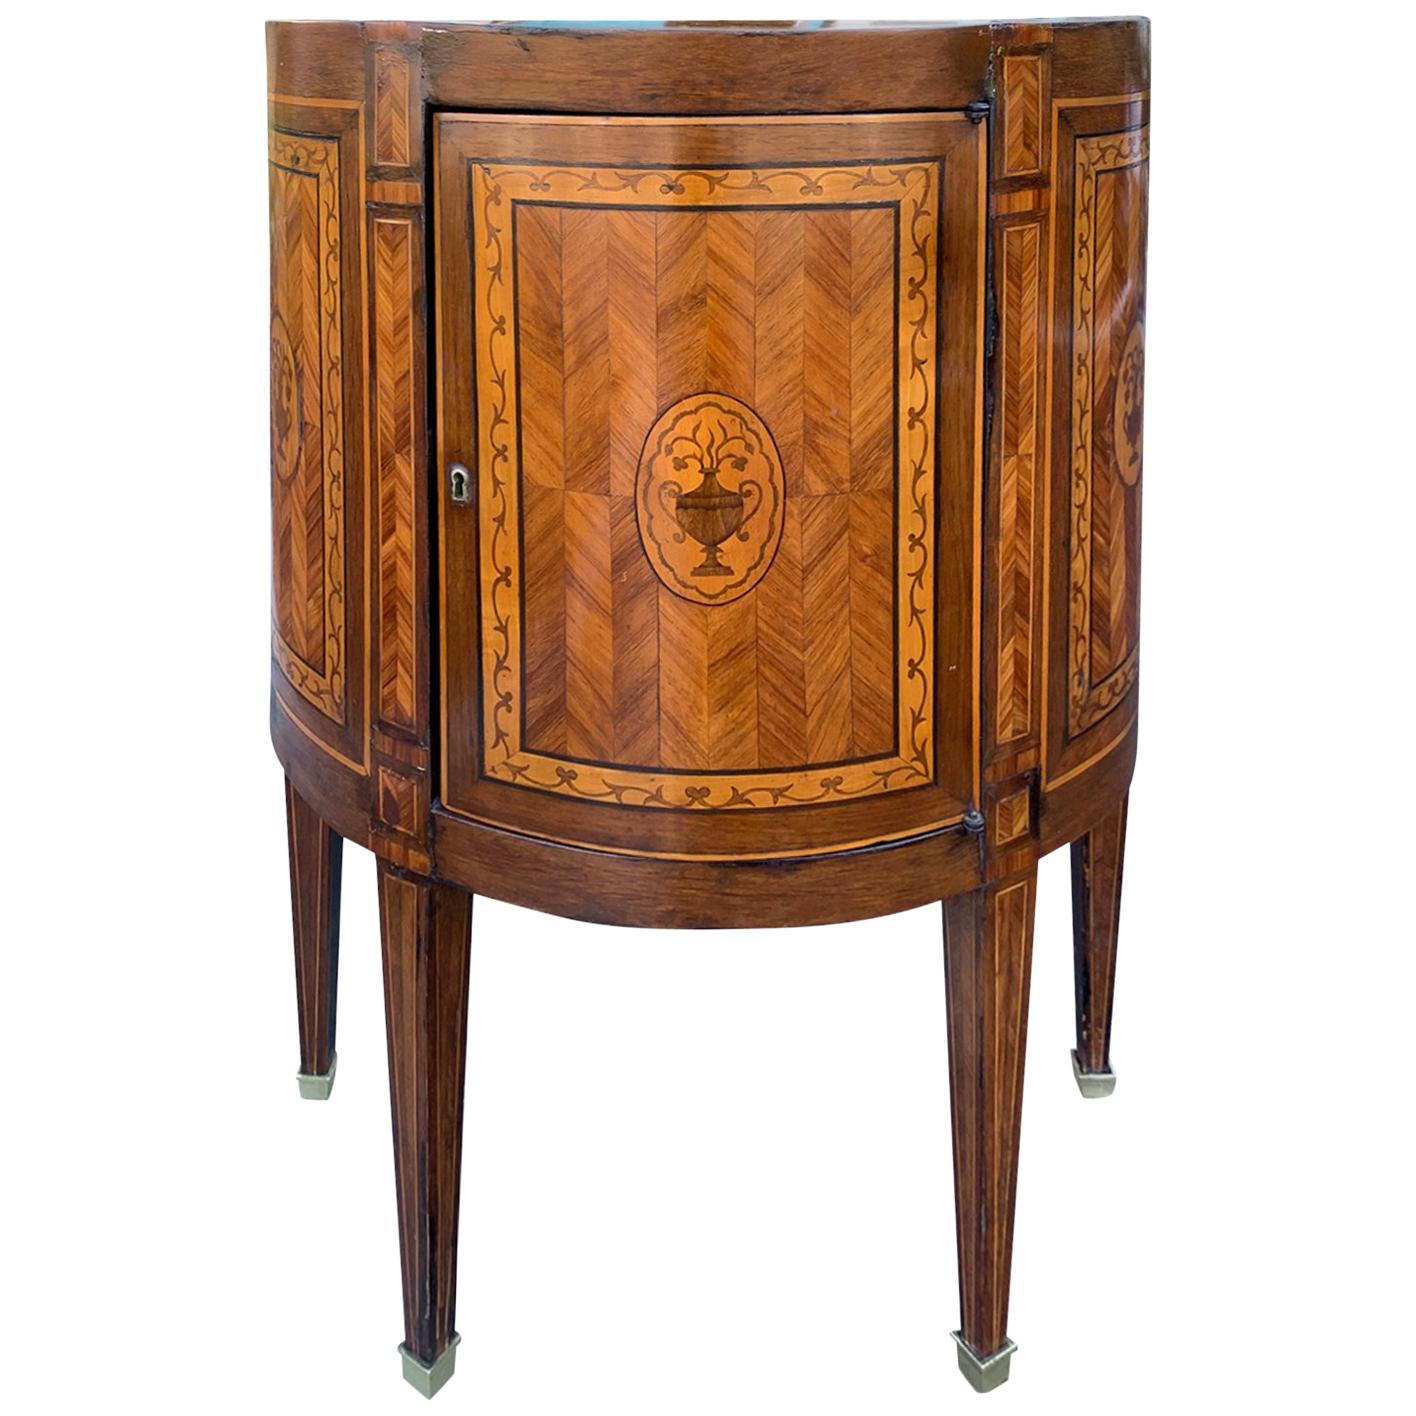 18th Century French Inlaid Demilune Cabinet